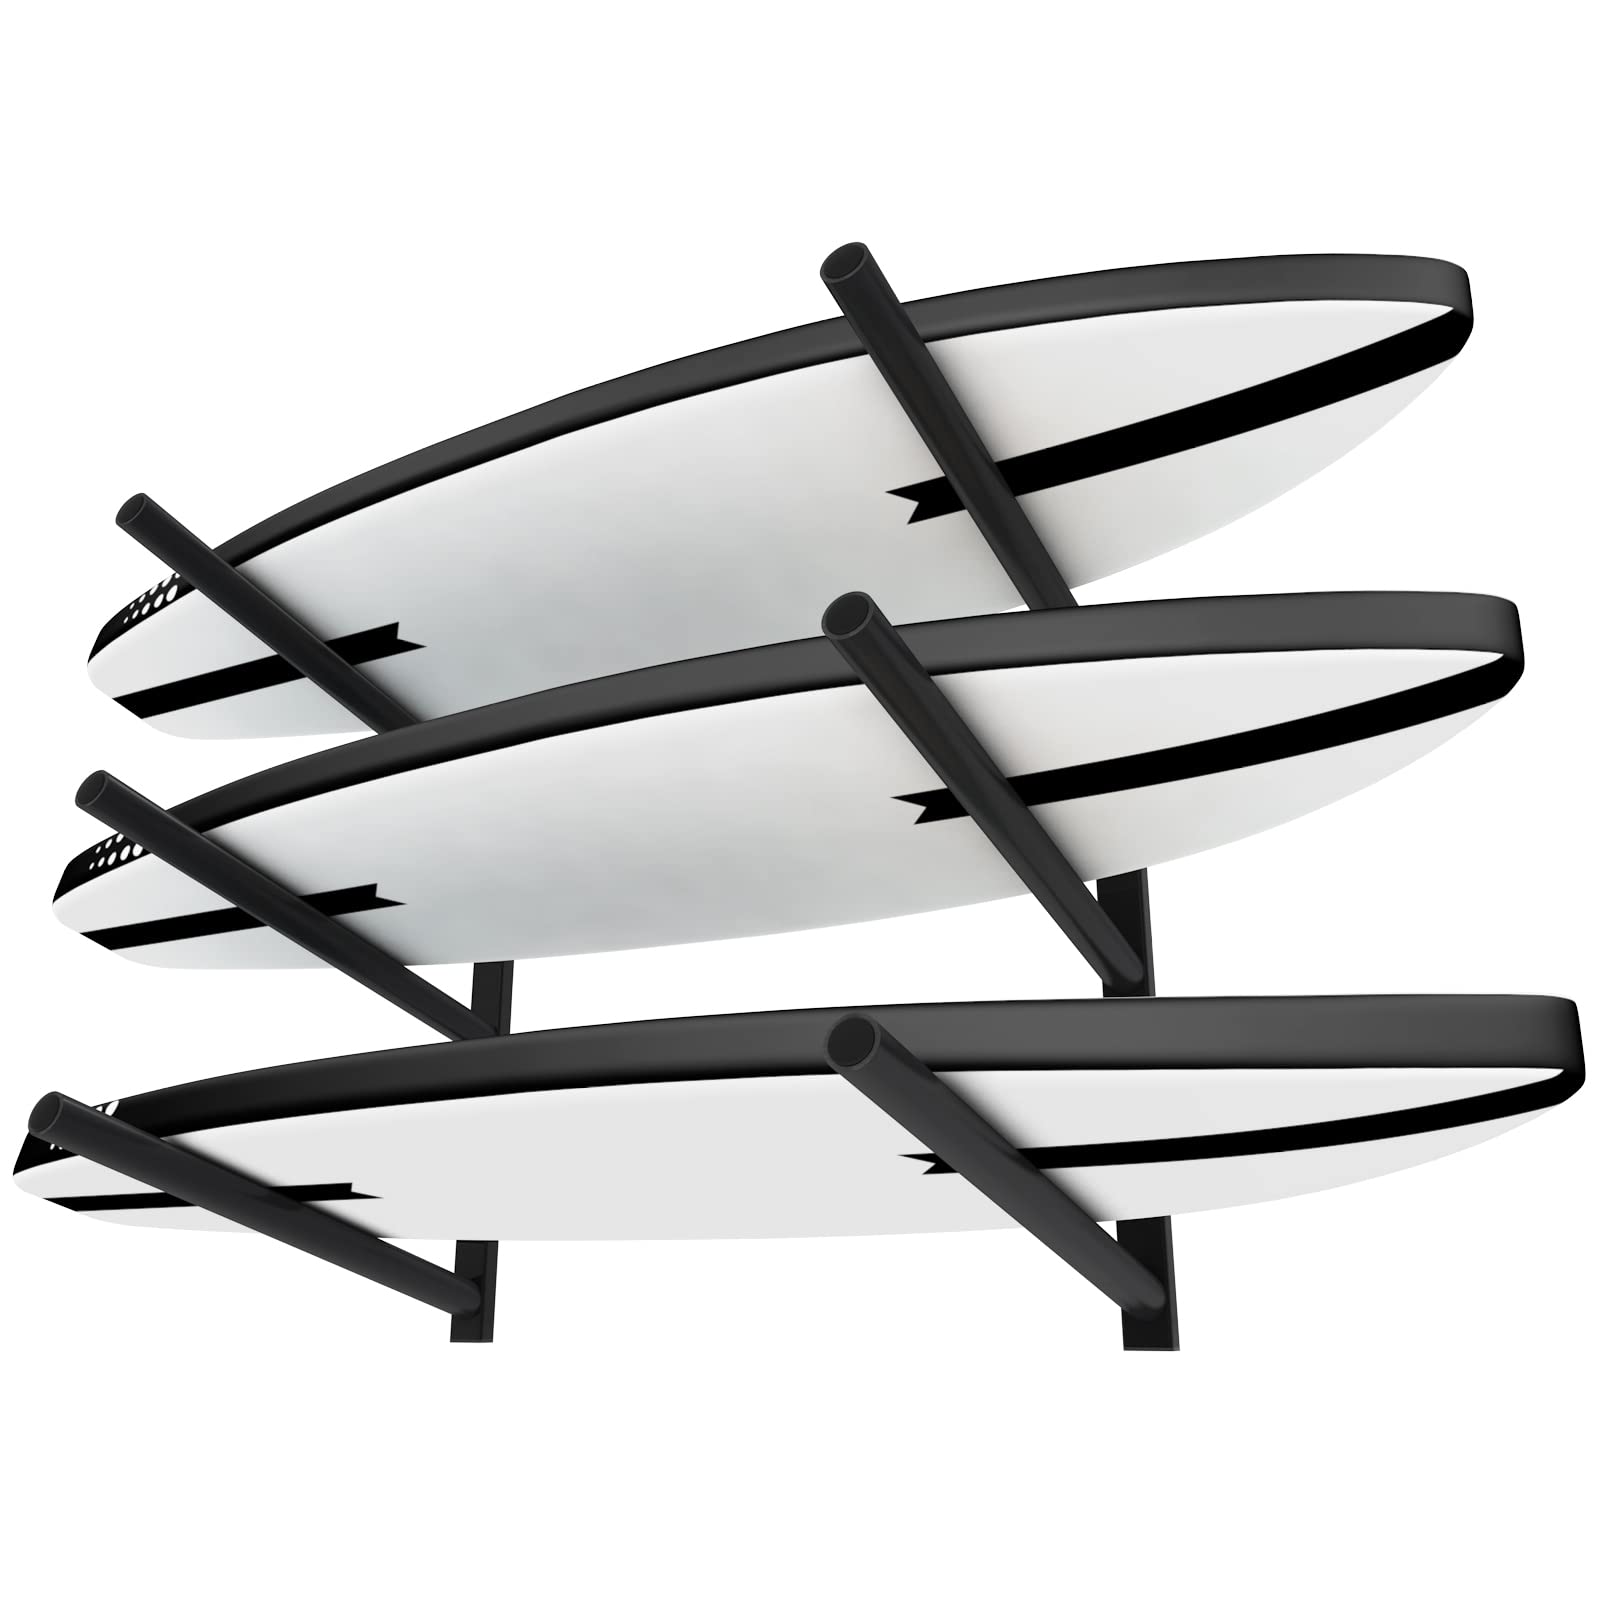 TWO STONES Surfboard Rack for Wall  Surfboard Wall Mount  Paddle Board Rack  Surfboard Wall Rack  Paddle Board Wall Rack  Surf board Wall M